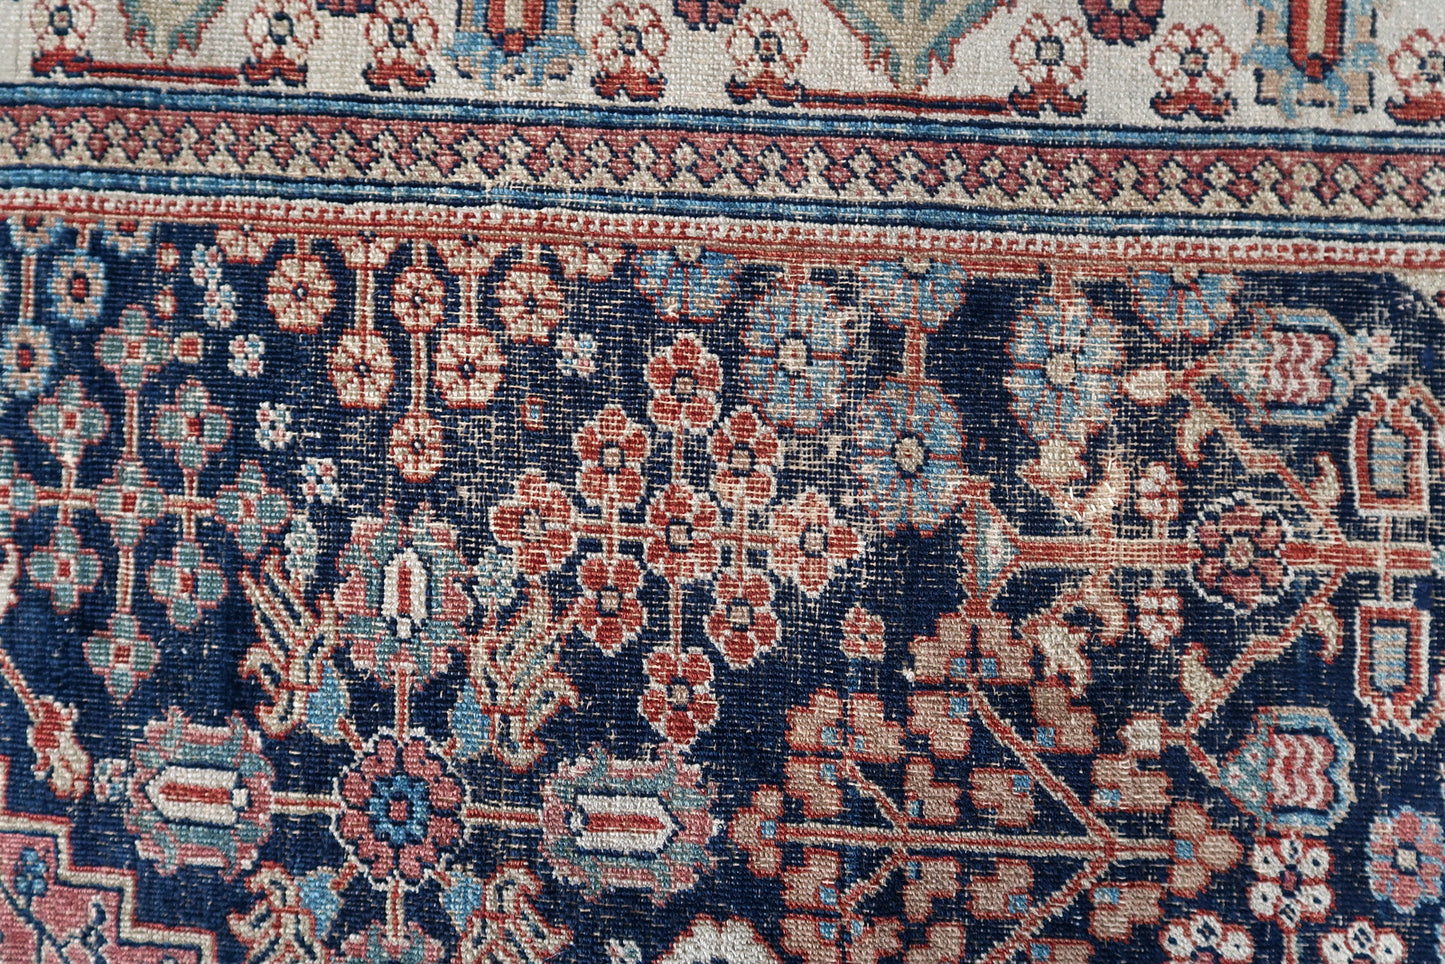 Handmade antique Persian Jozan rug in traditional design and night blue color. The rug is from the beginning of 20th century in distressed condition. On the sign it says 1335 year by Islamic calendar, it is 1915th year.